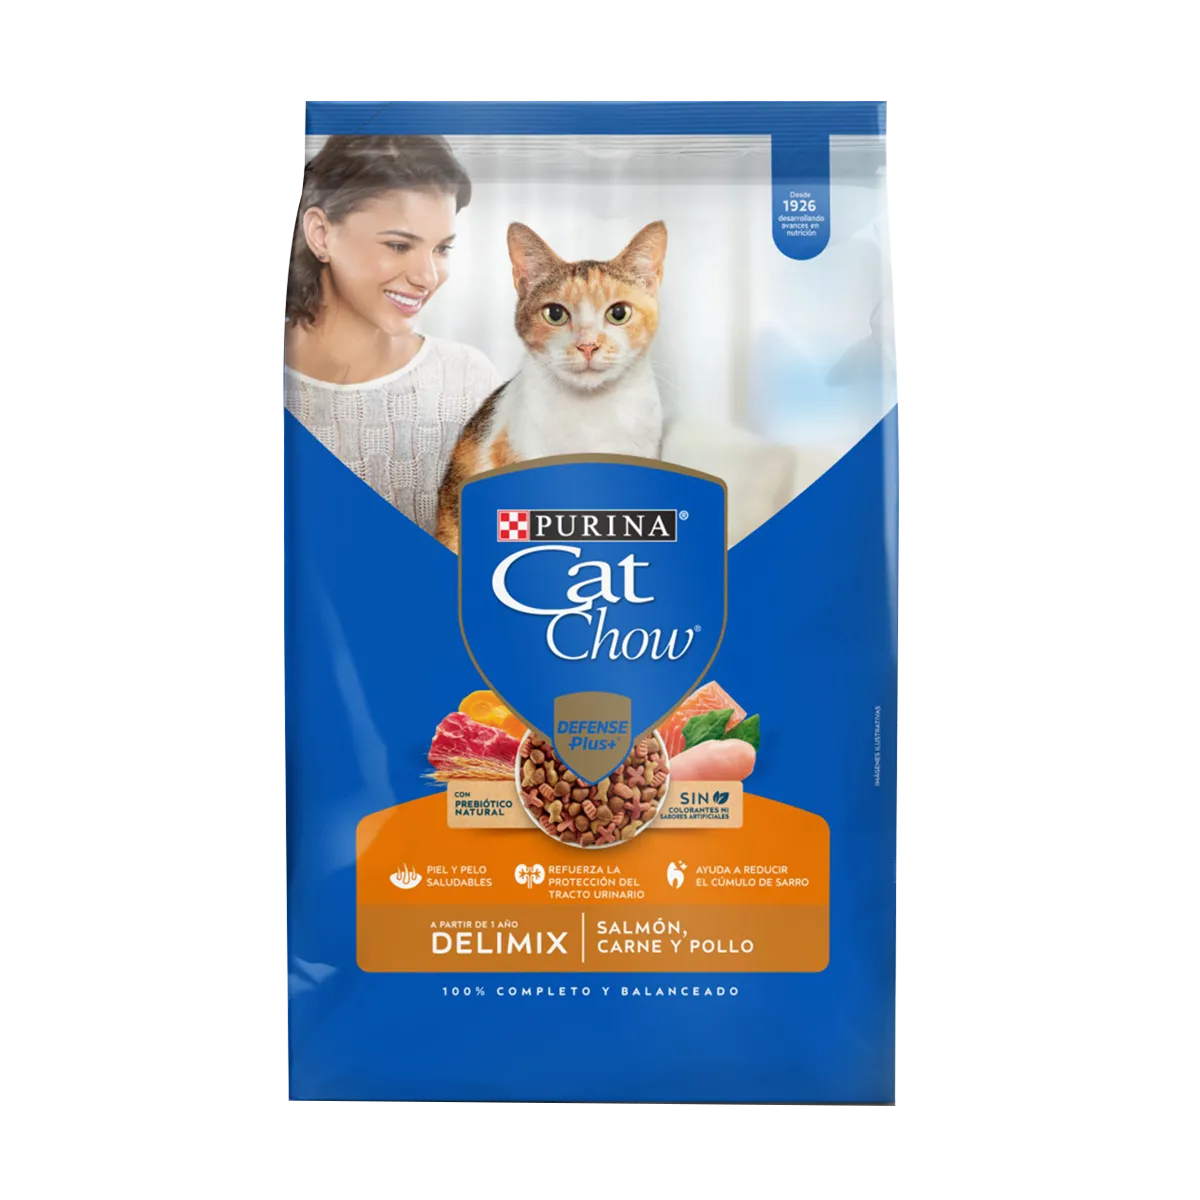 Purina-Cat-Chow-DRY-Delimix-adultos-01